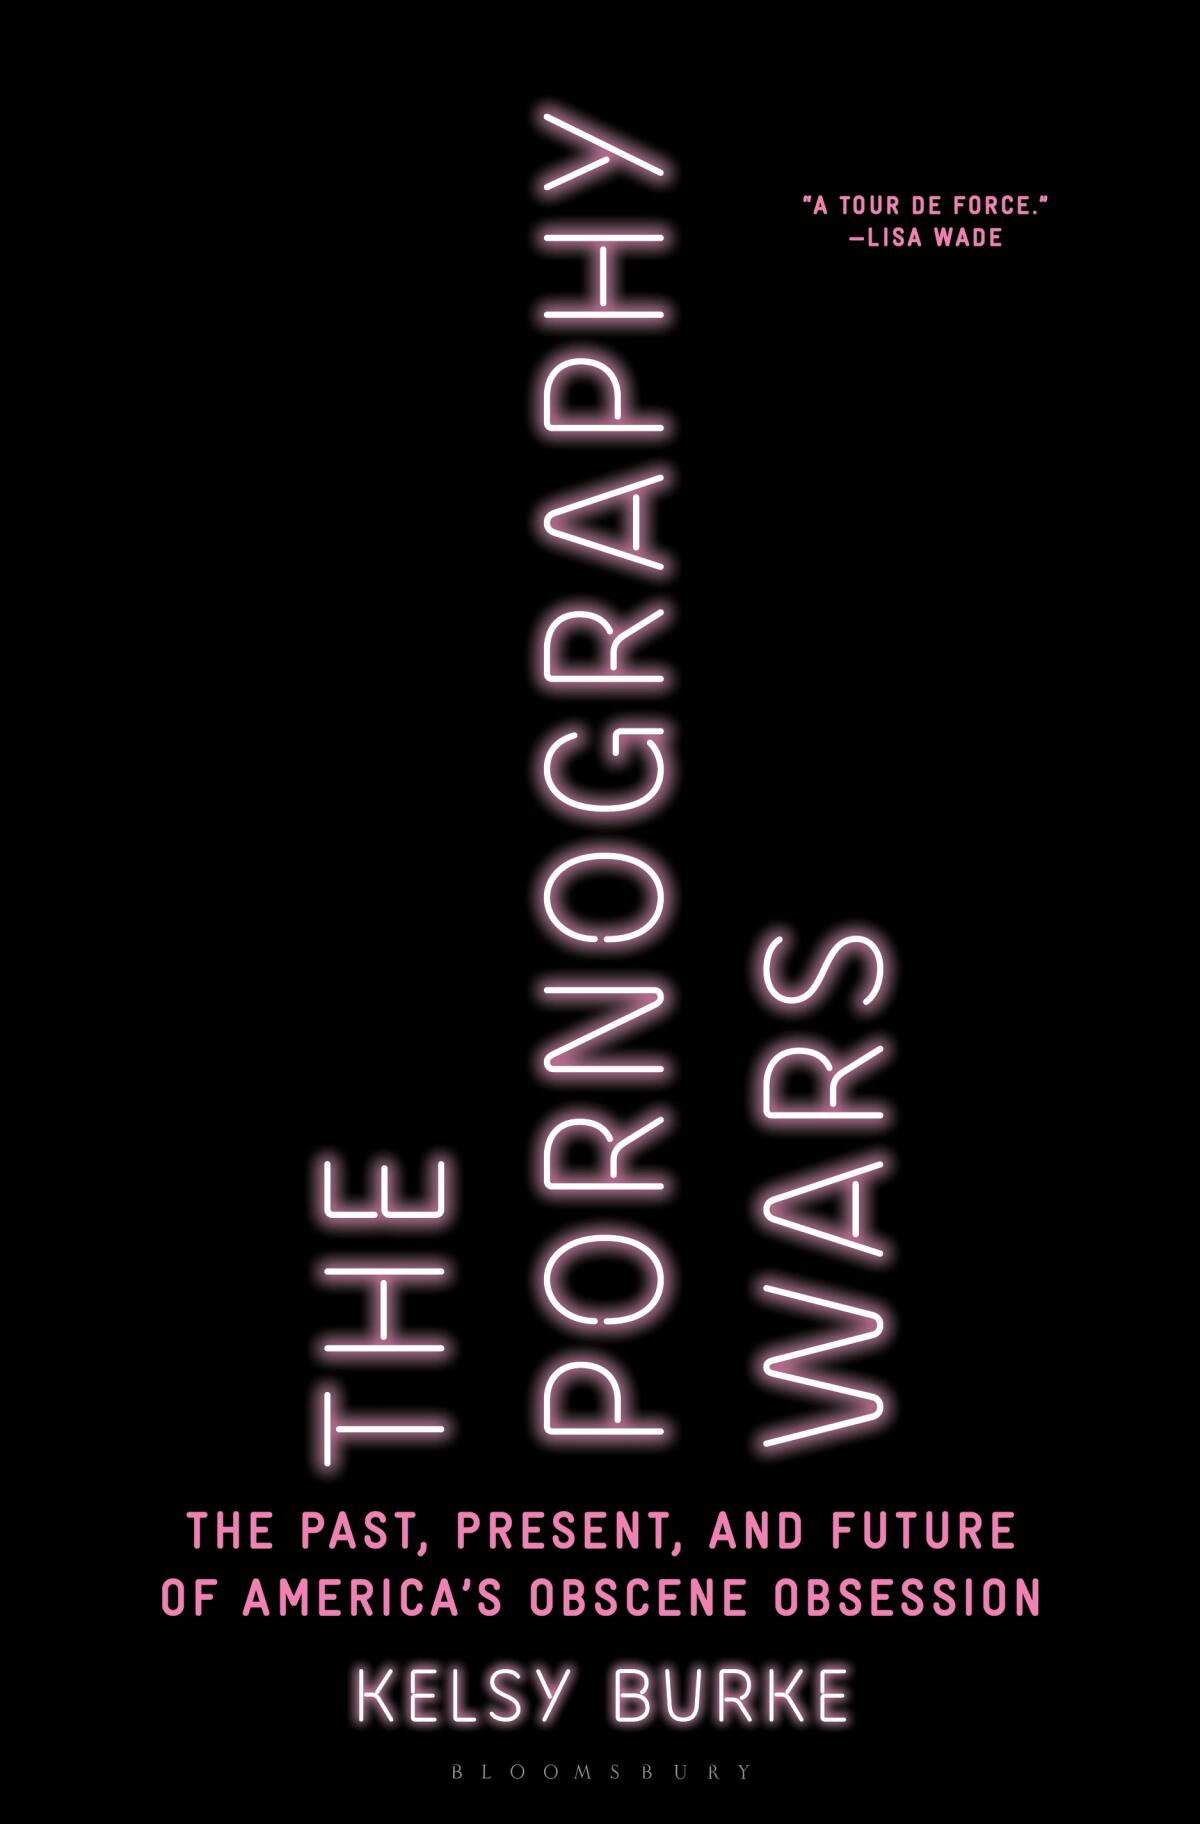 'The Pornography Wars,' by Kelsey Burke